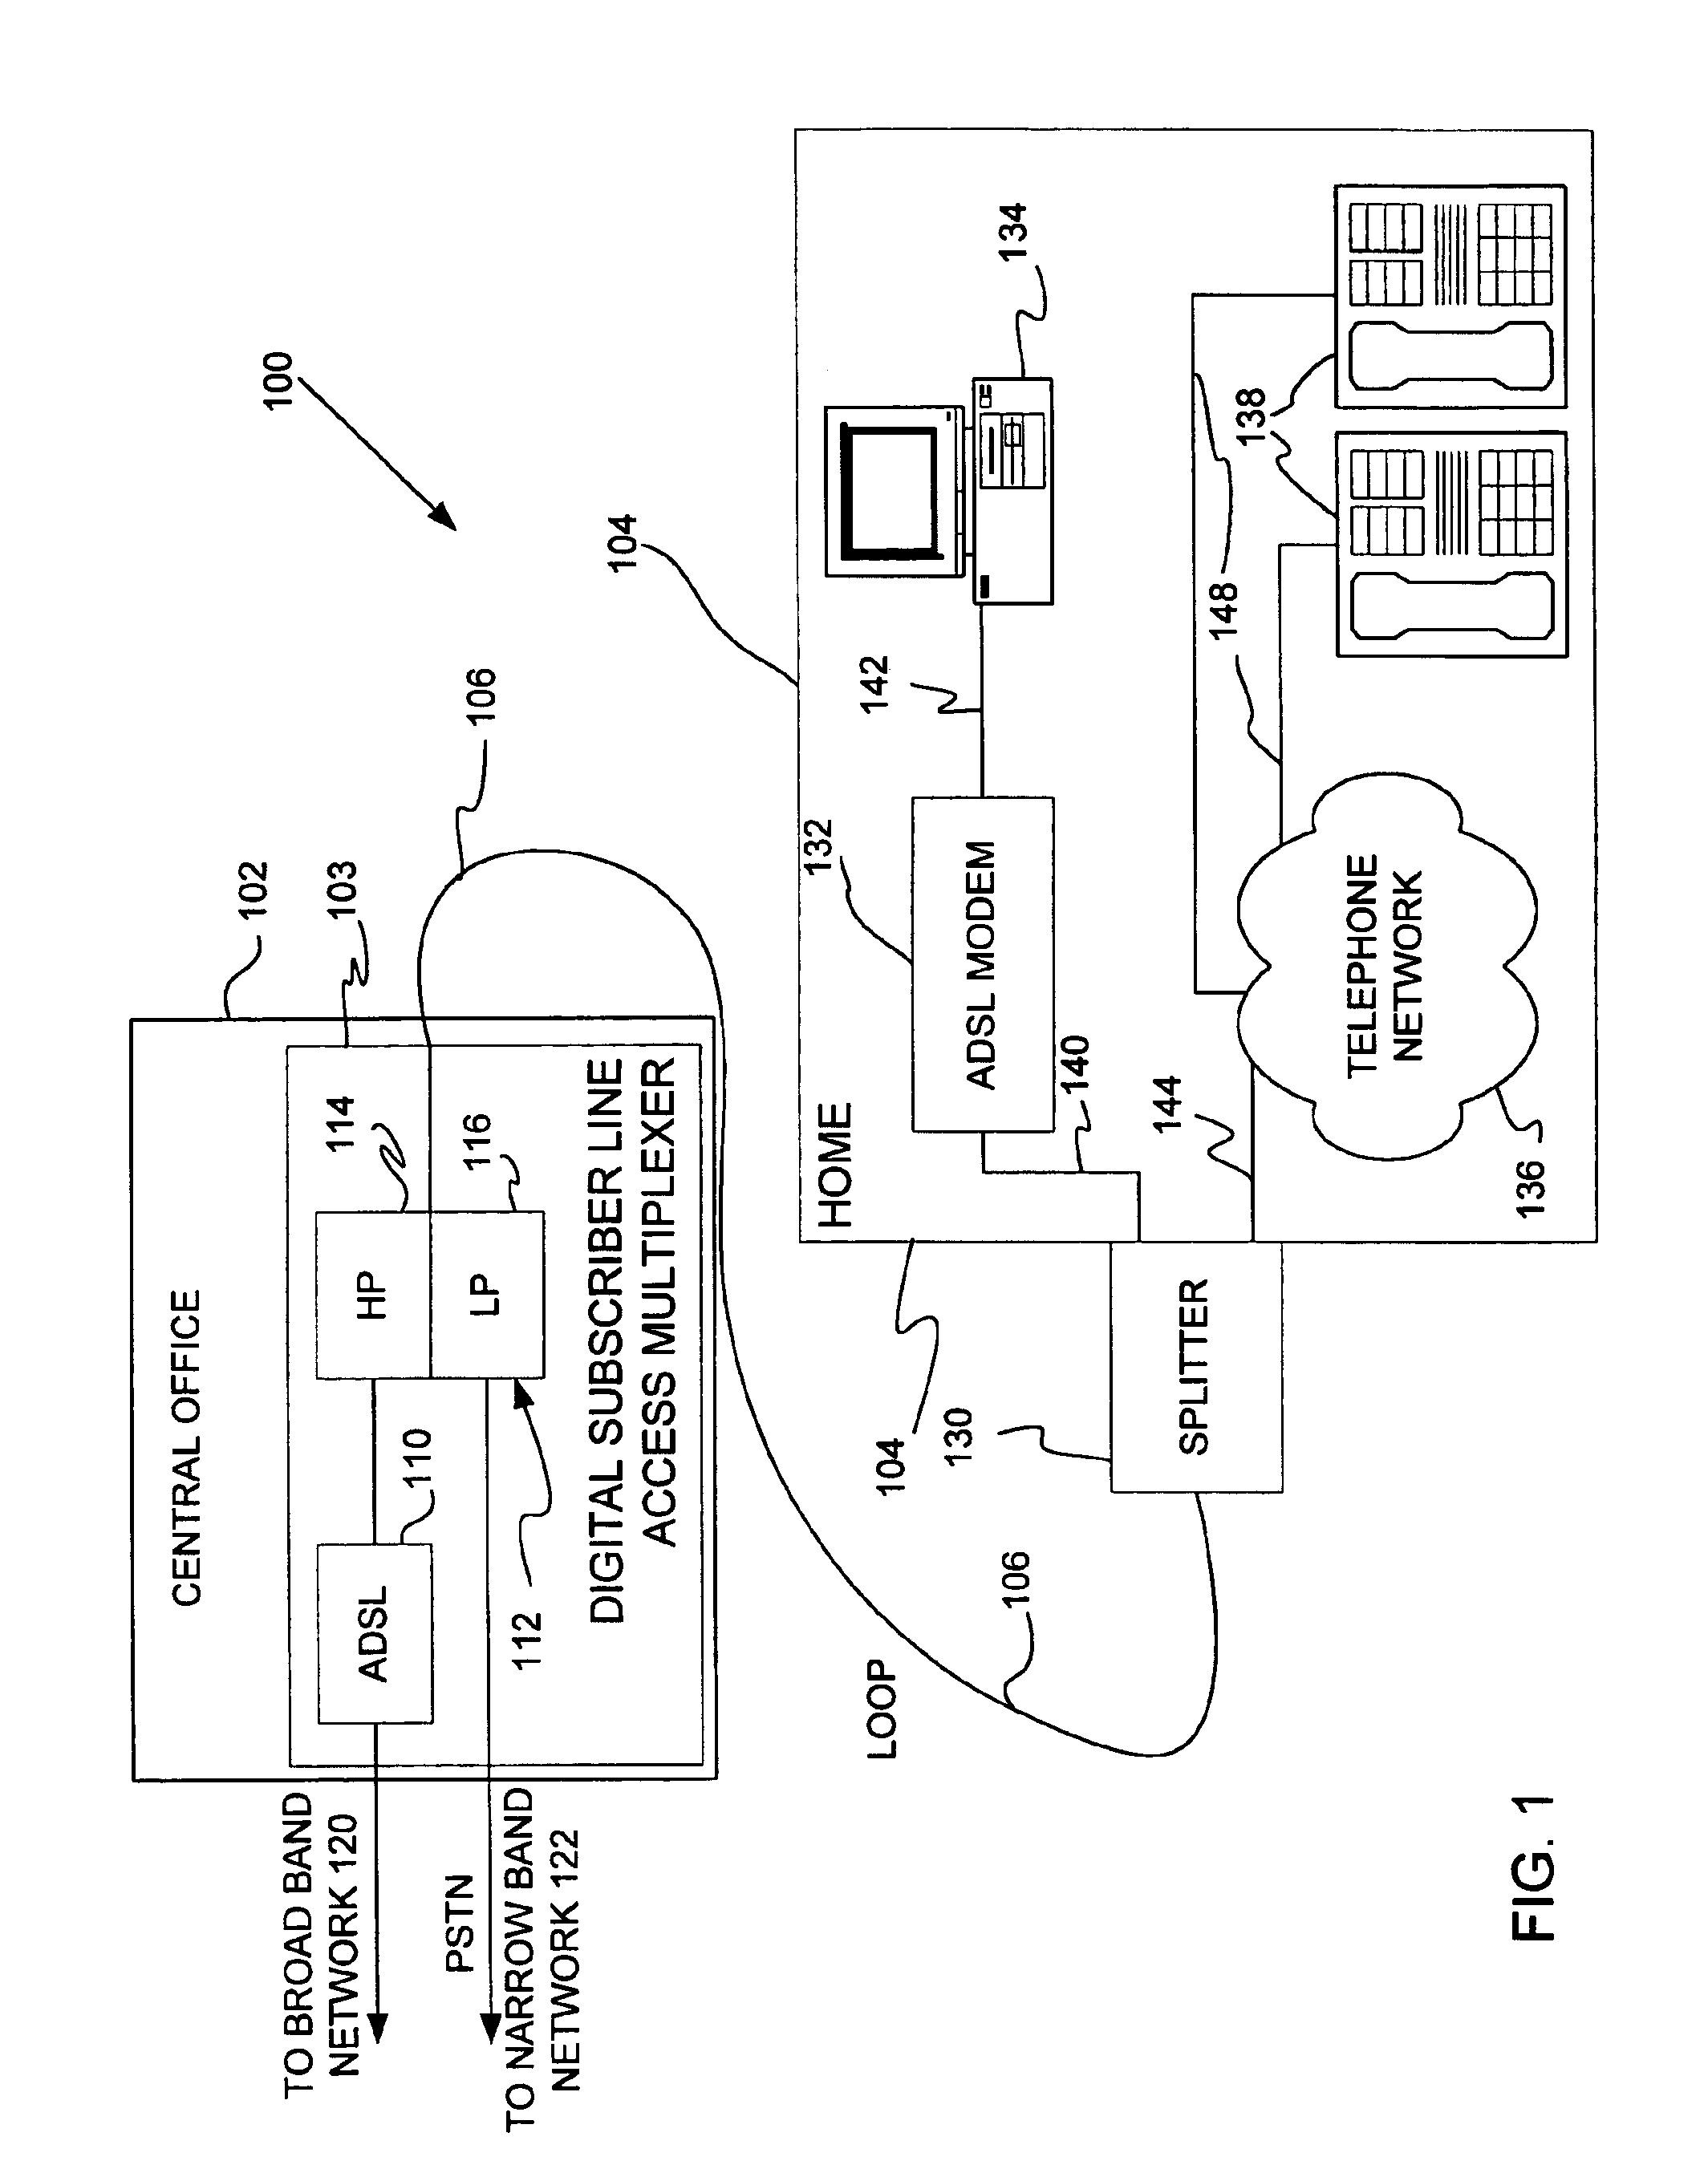 System and method for adaptively accommodating a high amplitude downstream signal in a DSL modem